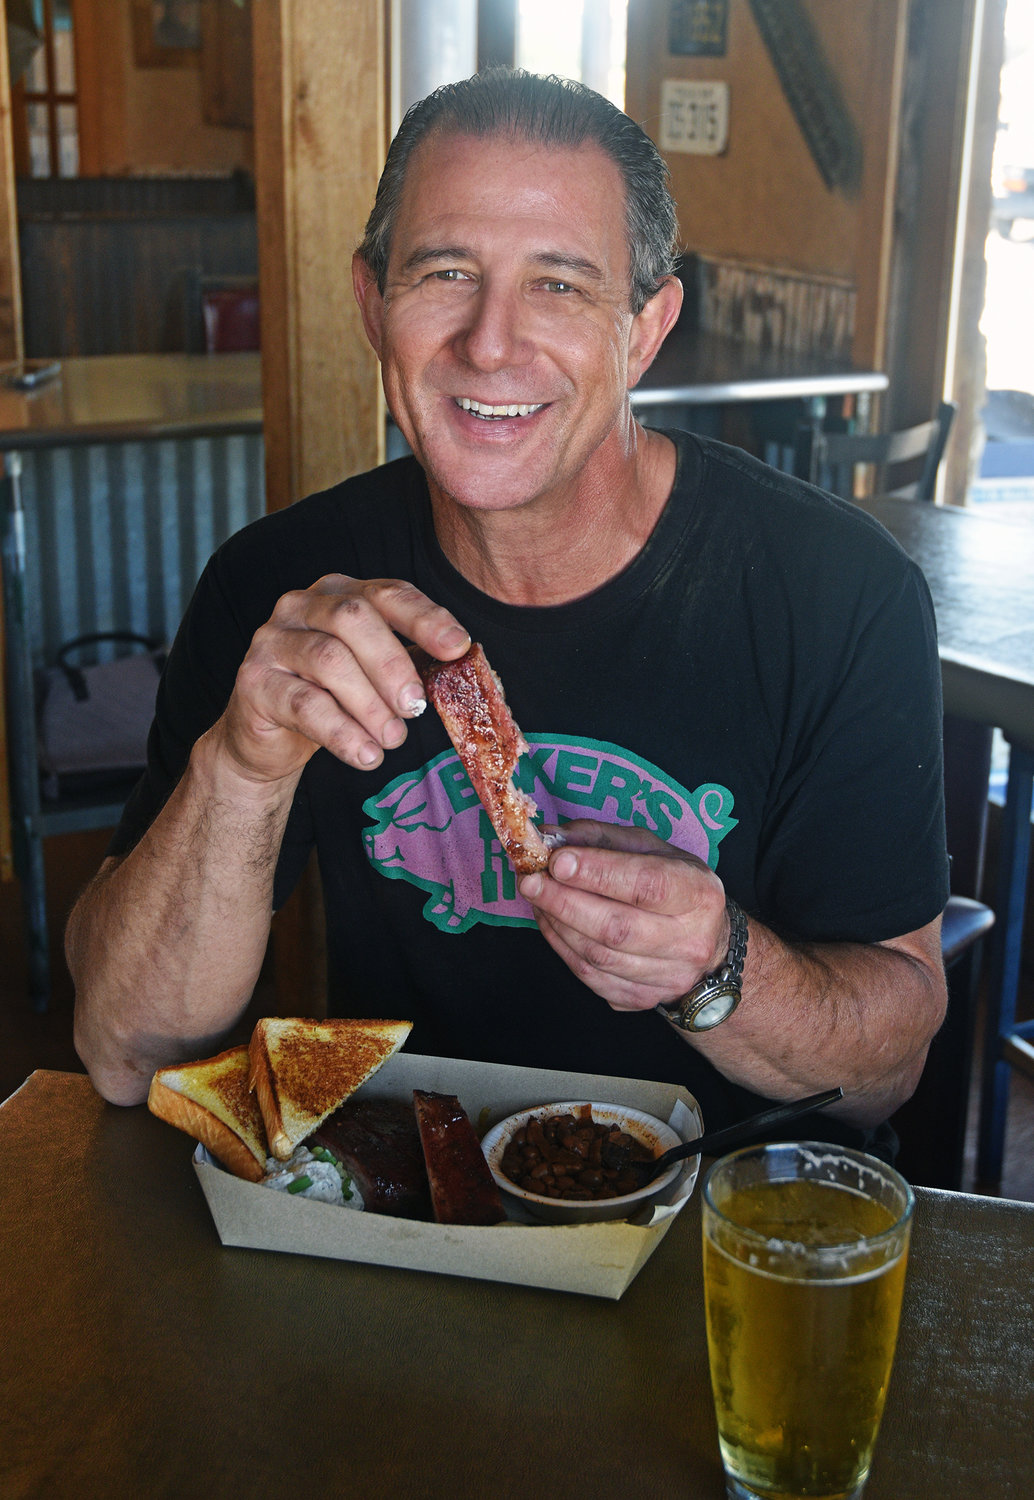 Brian Krier became a pitmaster nearly three decades ago and he and wife DeeAnna are still serving up delicious barbecue and more at Baker's Ribs.